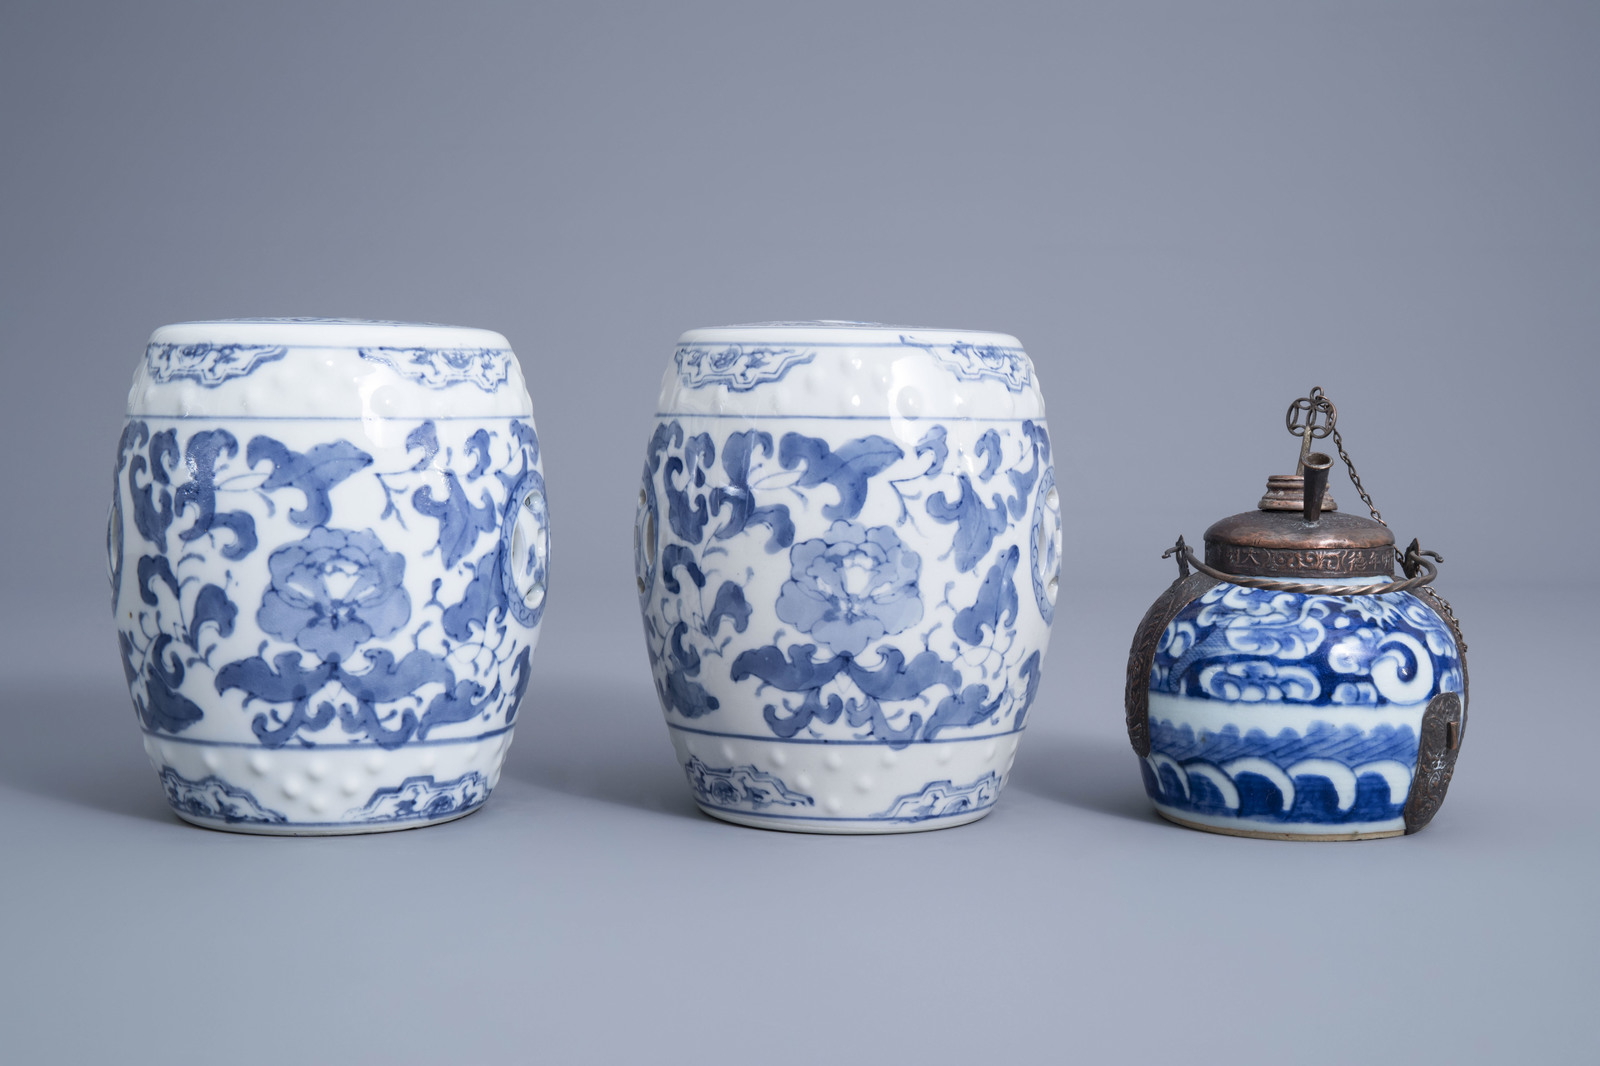 A varied collection of blue and white Chinese and Japanese porcelain, 19th/20th C. - Image 17 of 19